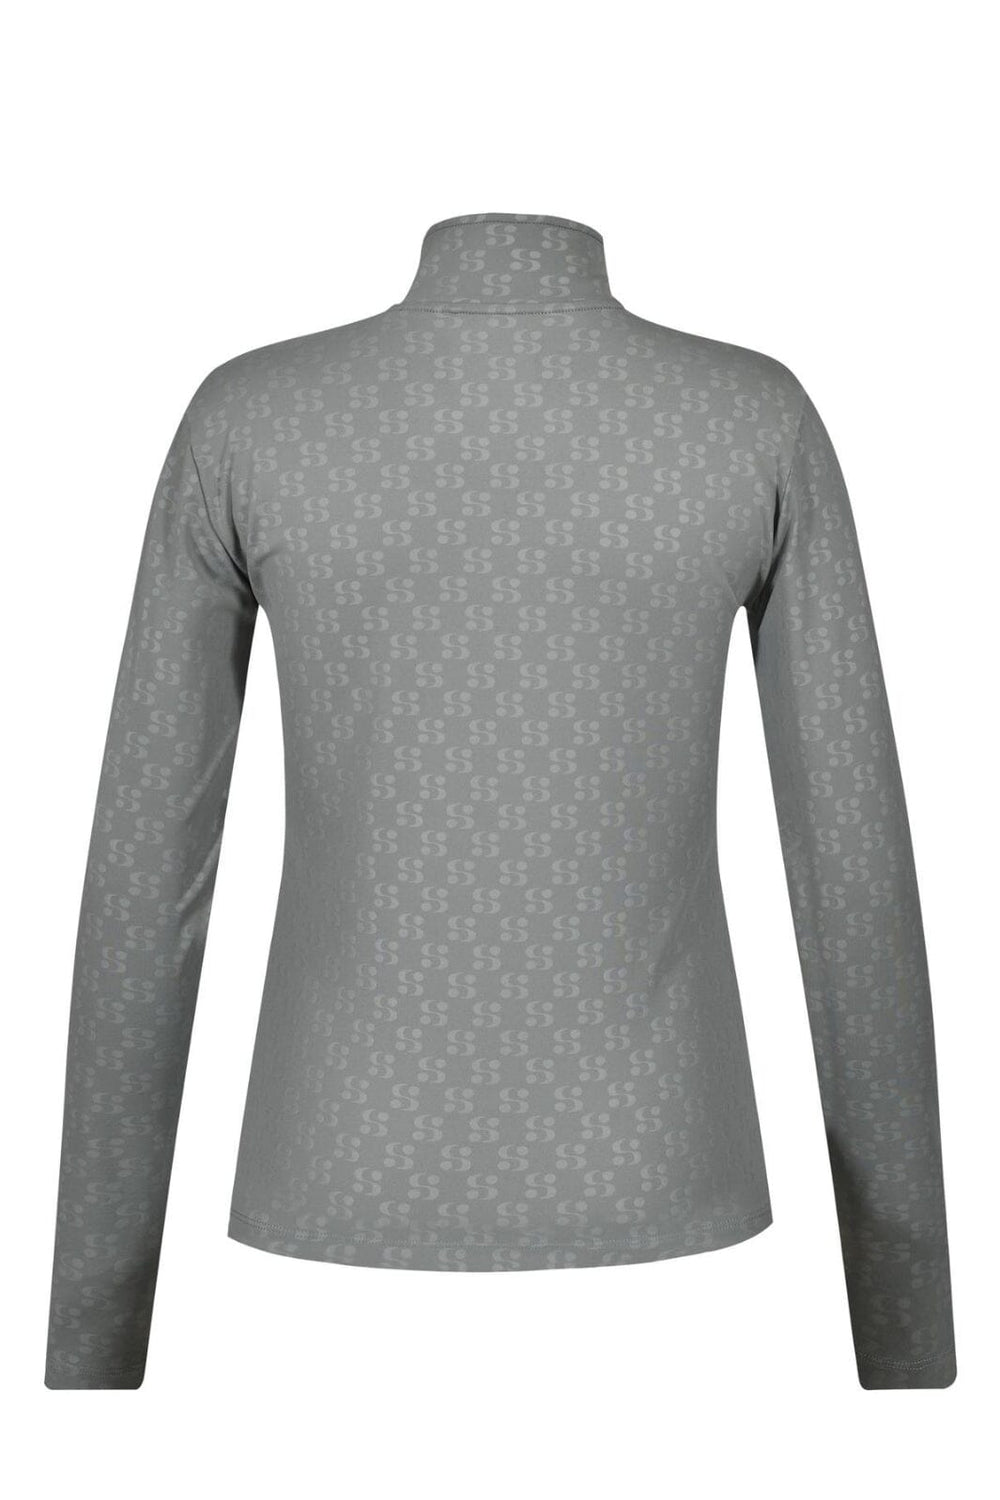 Sofie Schnoor - Snos508 T-Shirt Long-Sleeve - Charcoal Grey T-shirts 